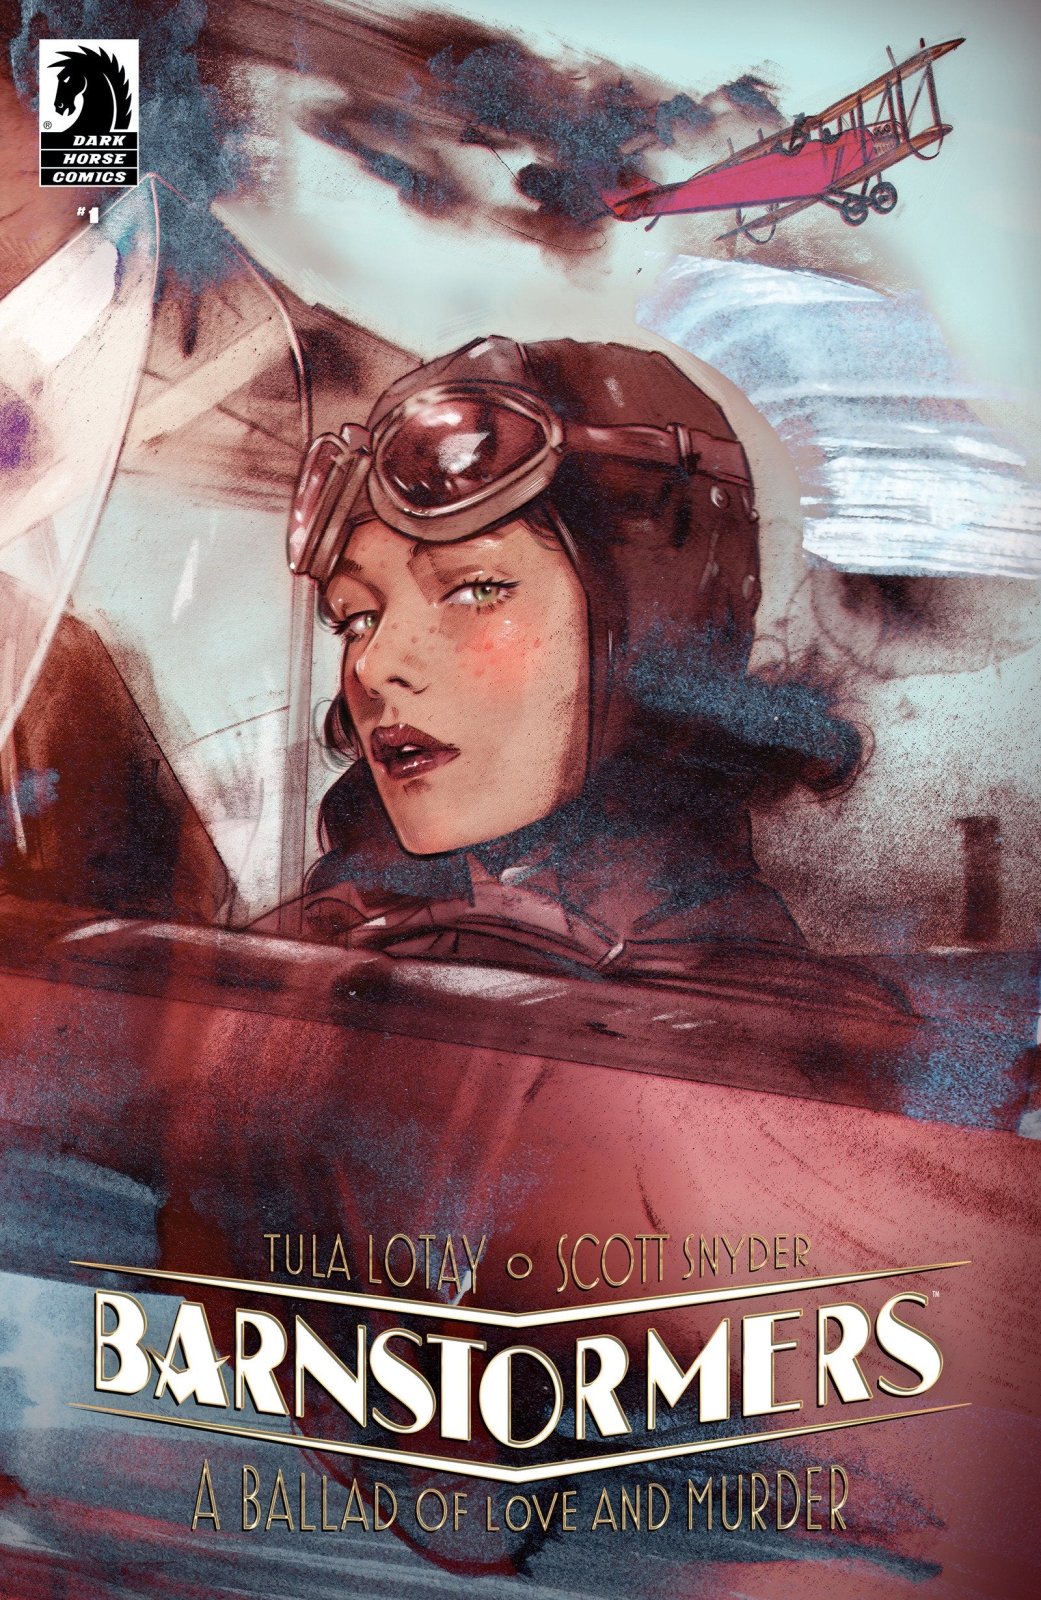 Barnstormers #1 (Cover E) (Foil) (Tula Lotay) - The Fourth Place